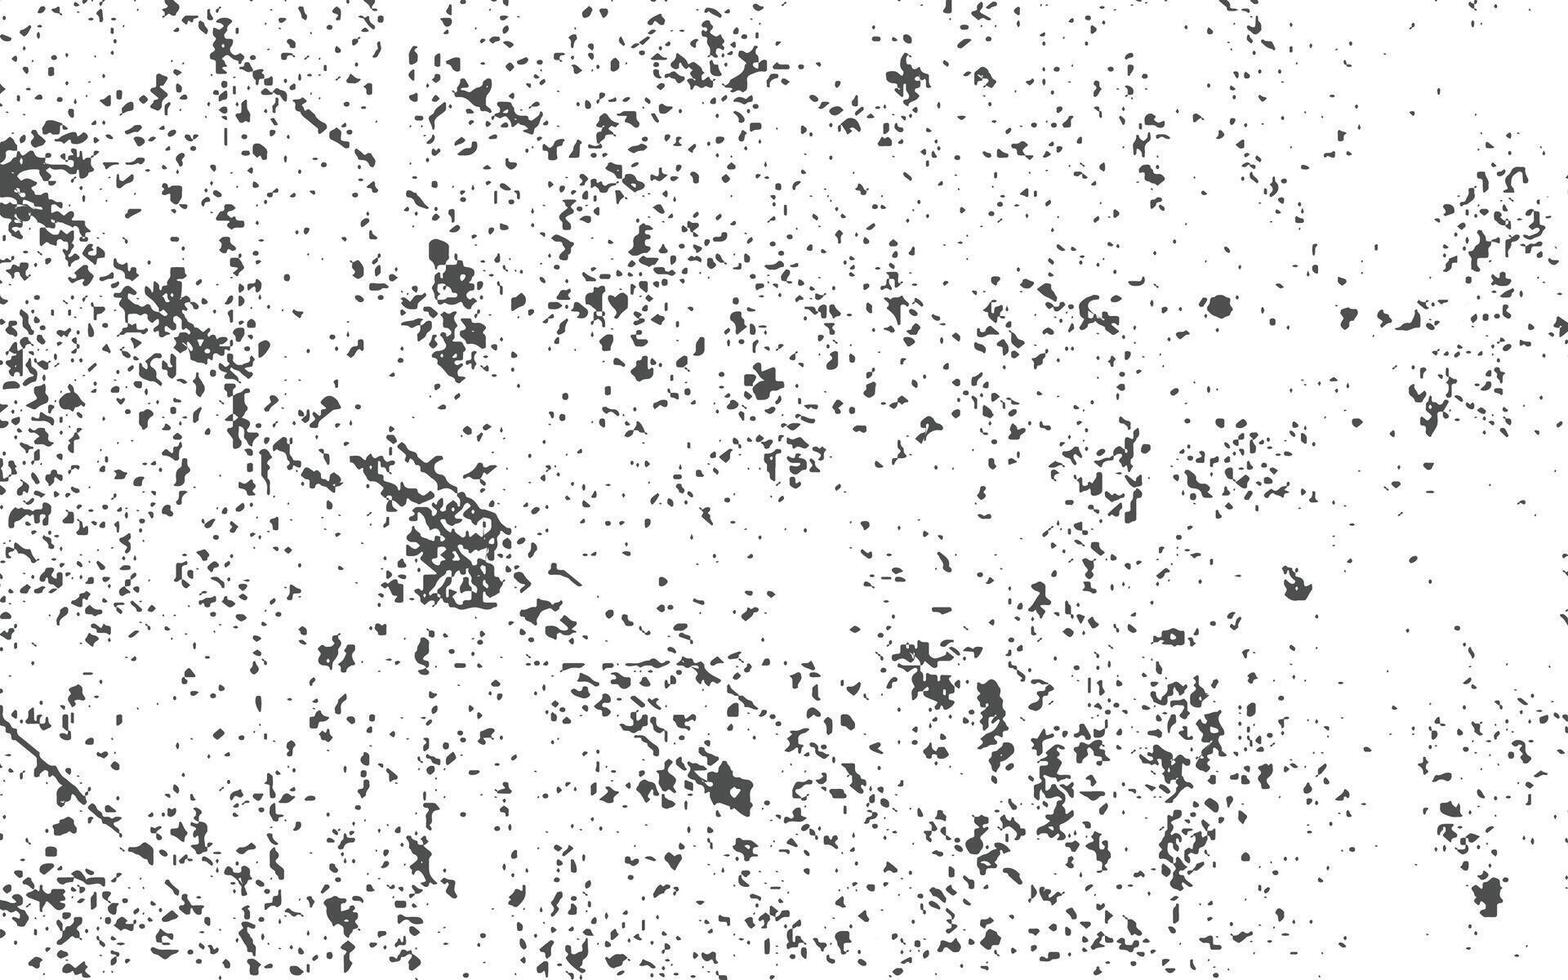 Distress vector. Texture Vector. Dust Overlay Distress Grain, Simply Place illustration over any Object to Create grungy Effect. abstract, splattered, dirty, texture for your design. vector